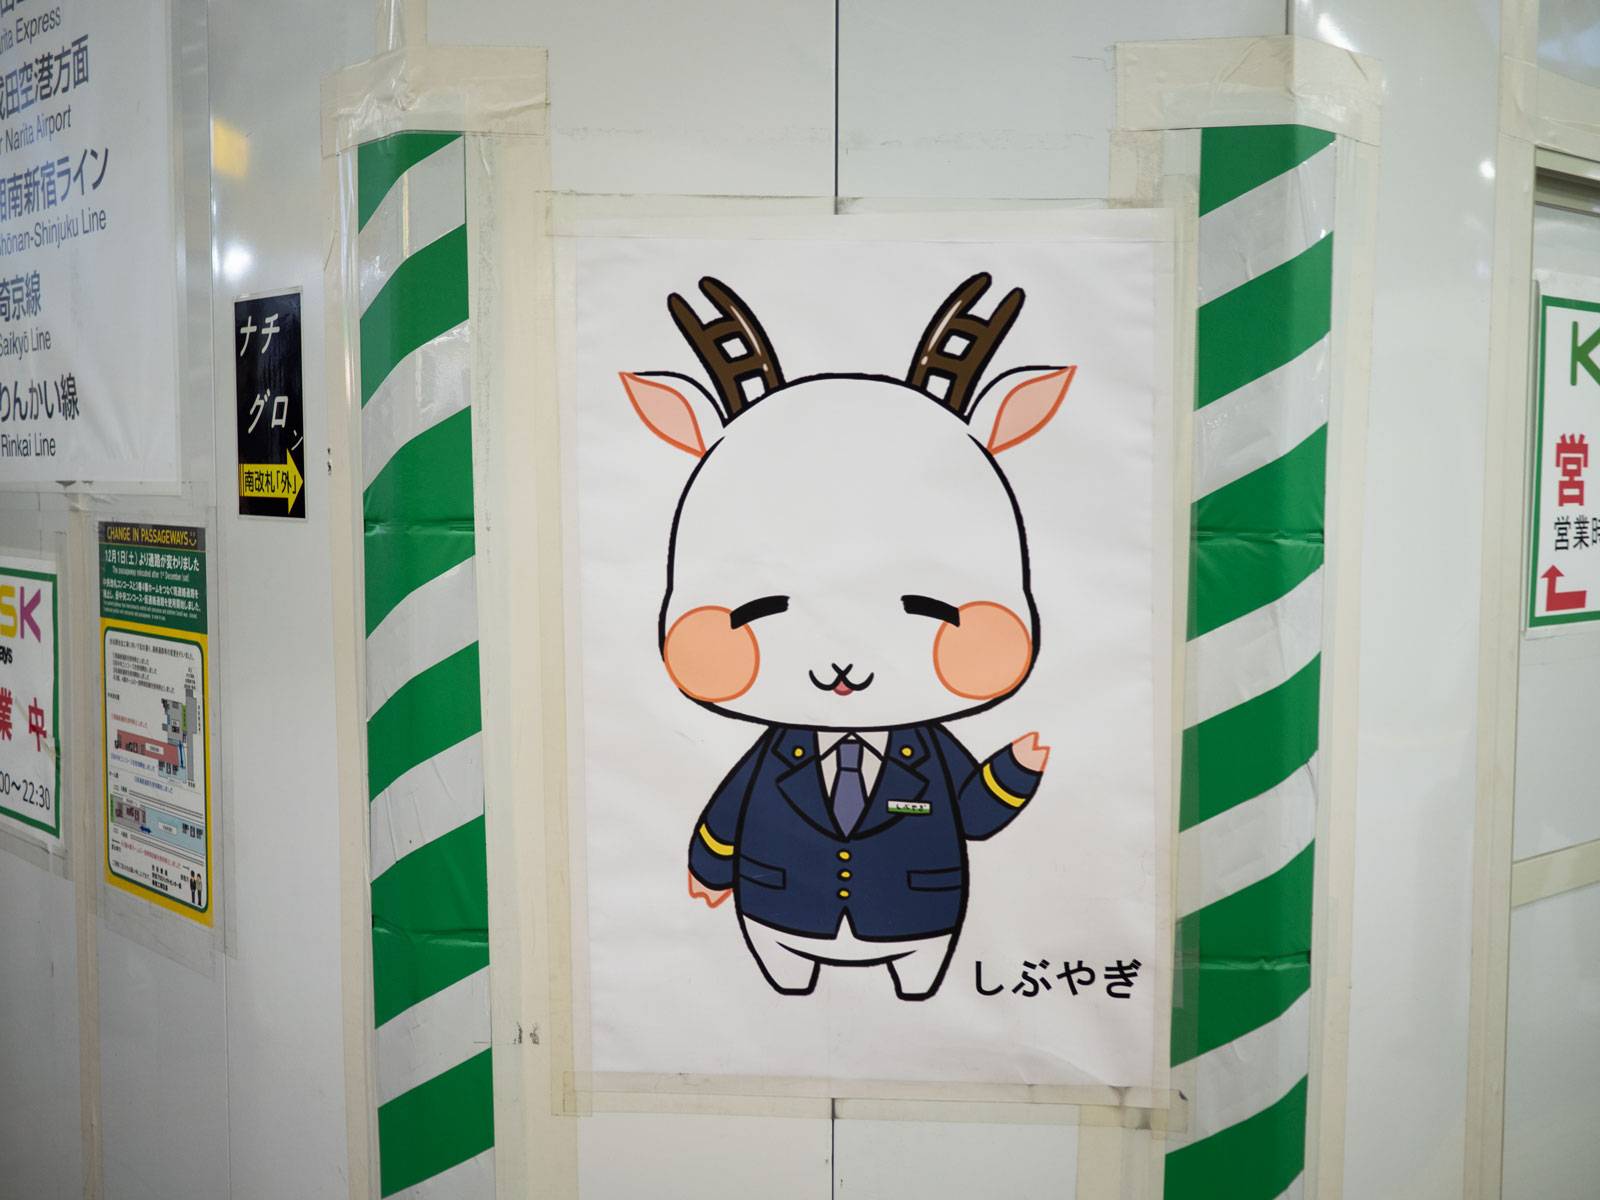 A sign with a deer railway mascot